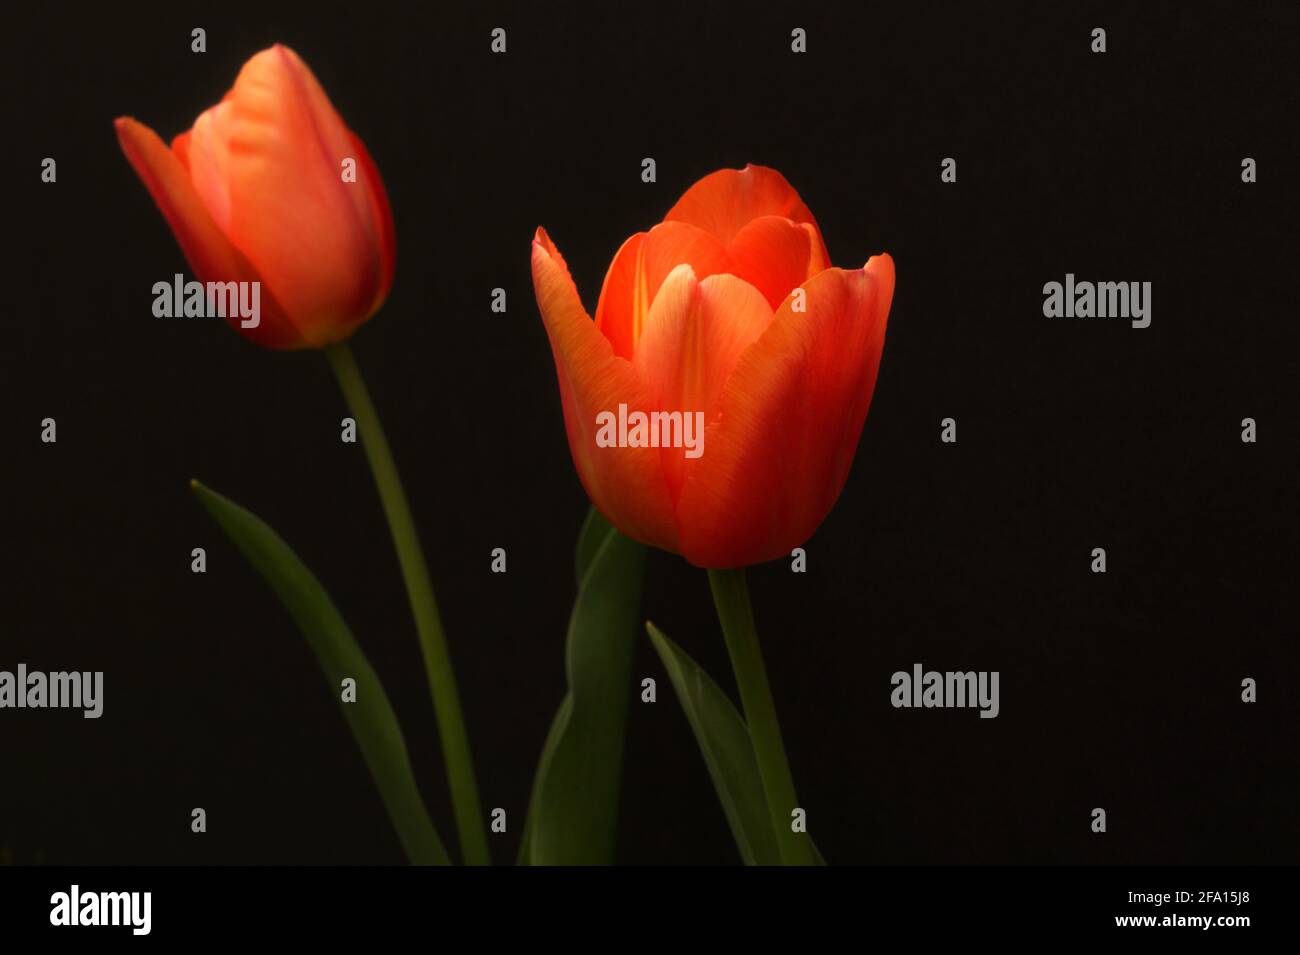 Tulips highlighted against a dark background. Stock Photo